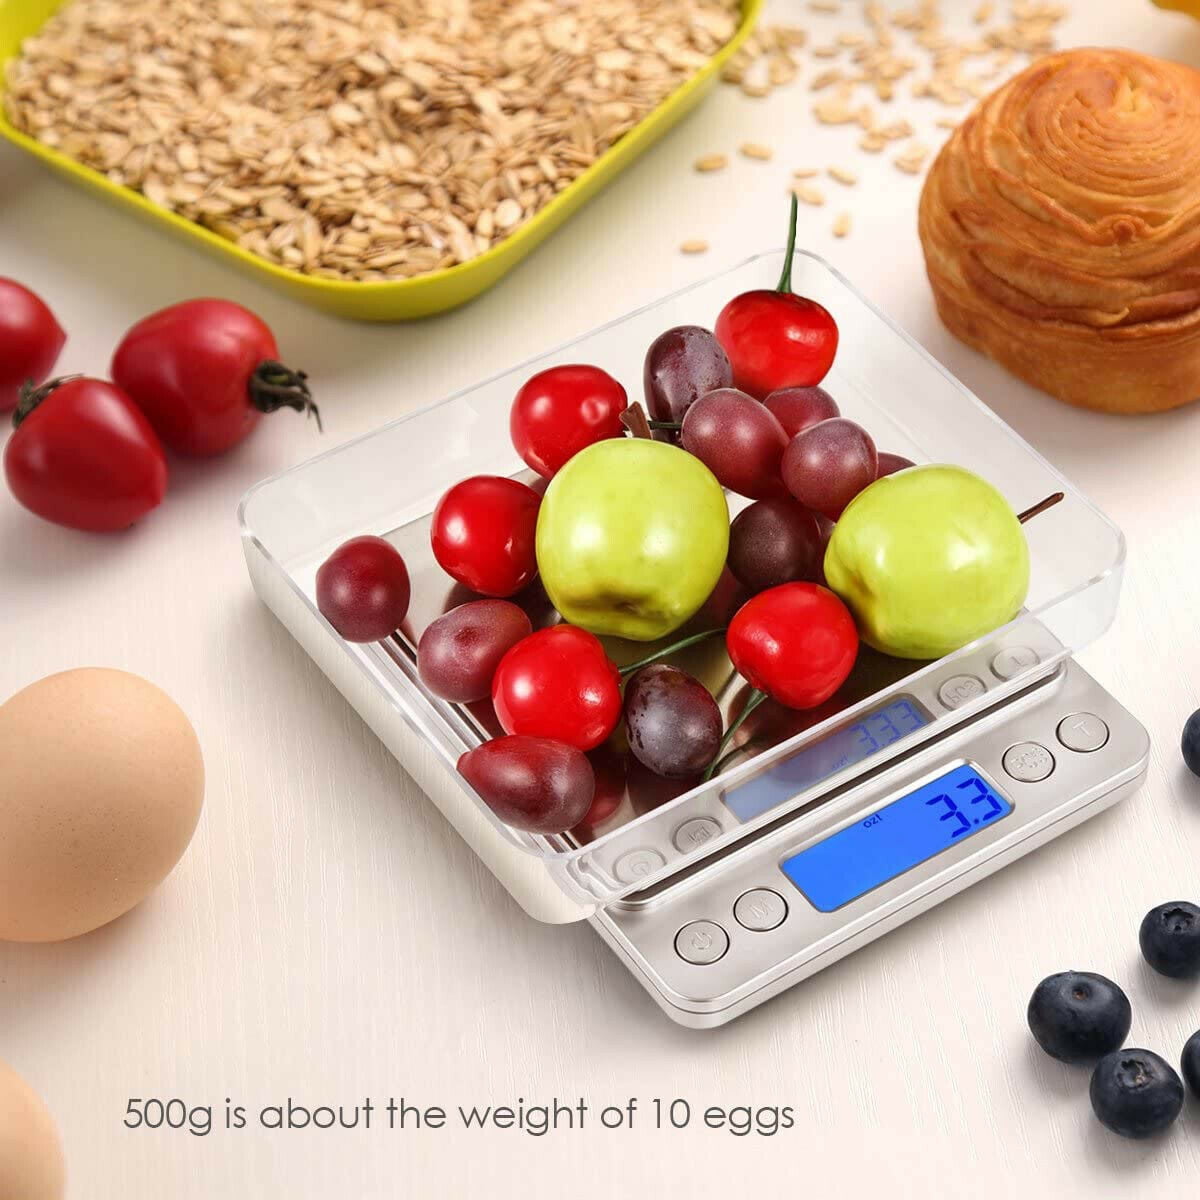 BOSINTY Scale Food 2 IN 1 Dual Power Mode Use for Meal Prep,[Load-bearing  33lb]Scale for Food Ounces and Grams, Unique CD-Grain Digital Kitchen Scale